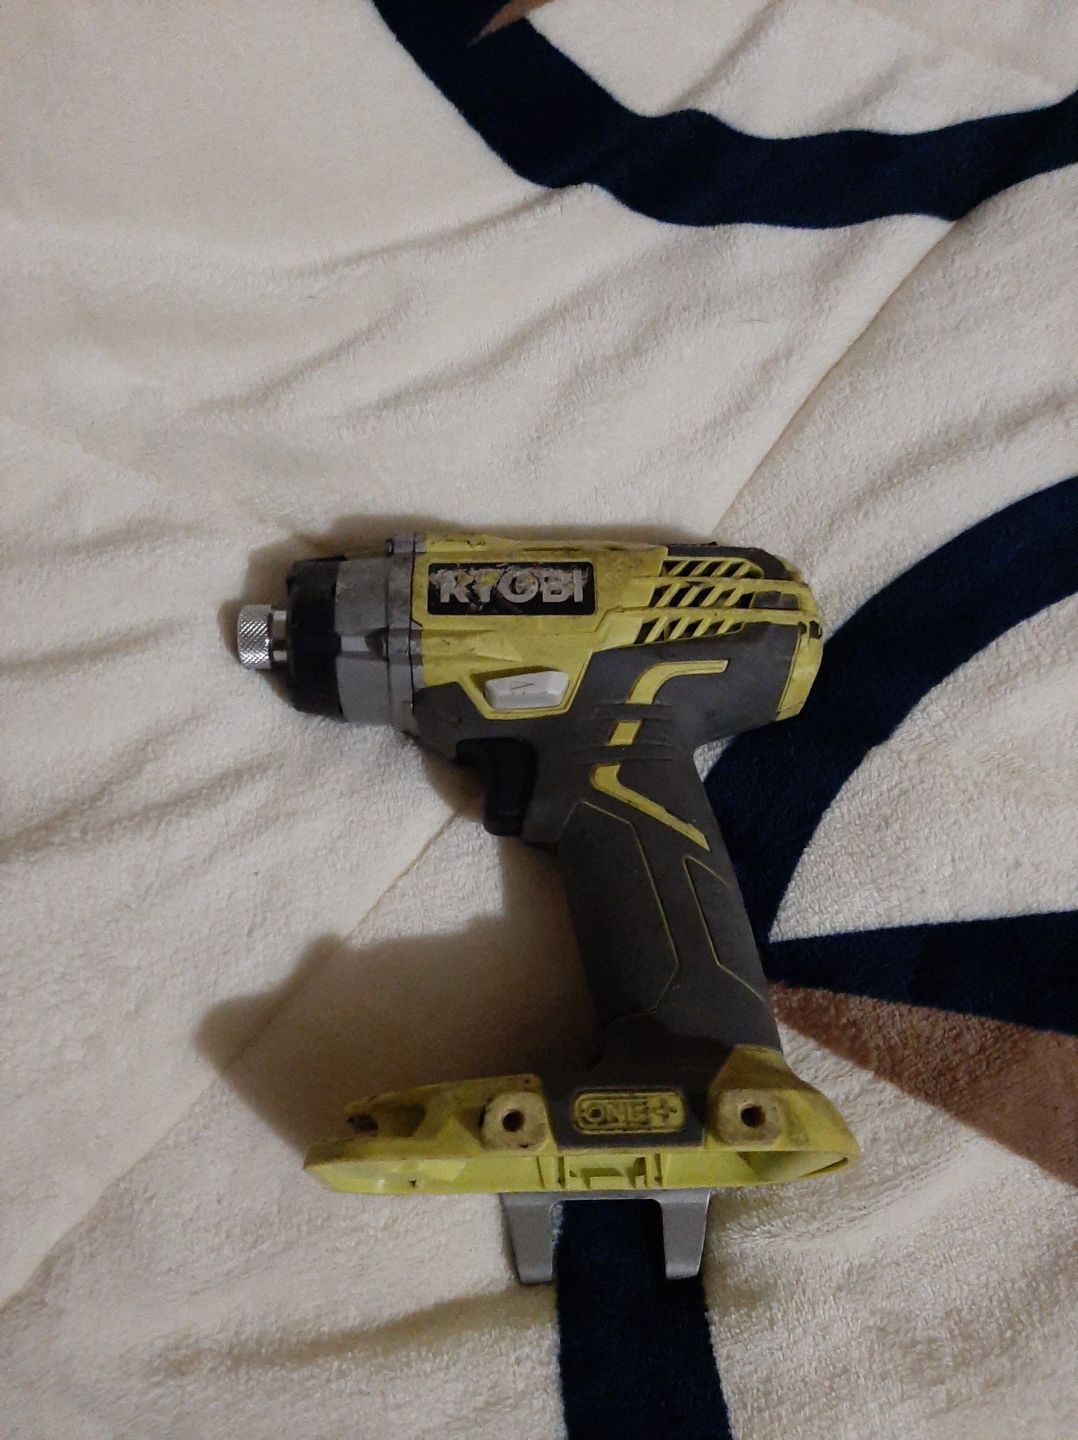 Ryobi impact drill w/ charger and 1 battery